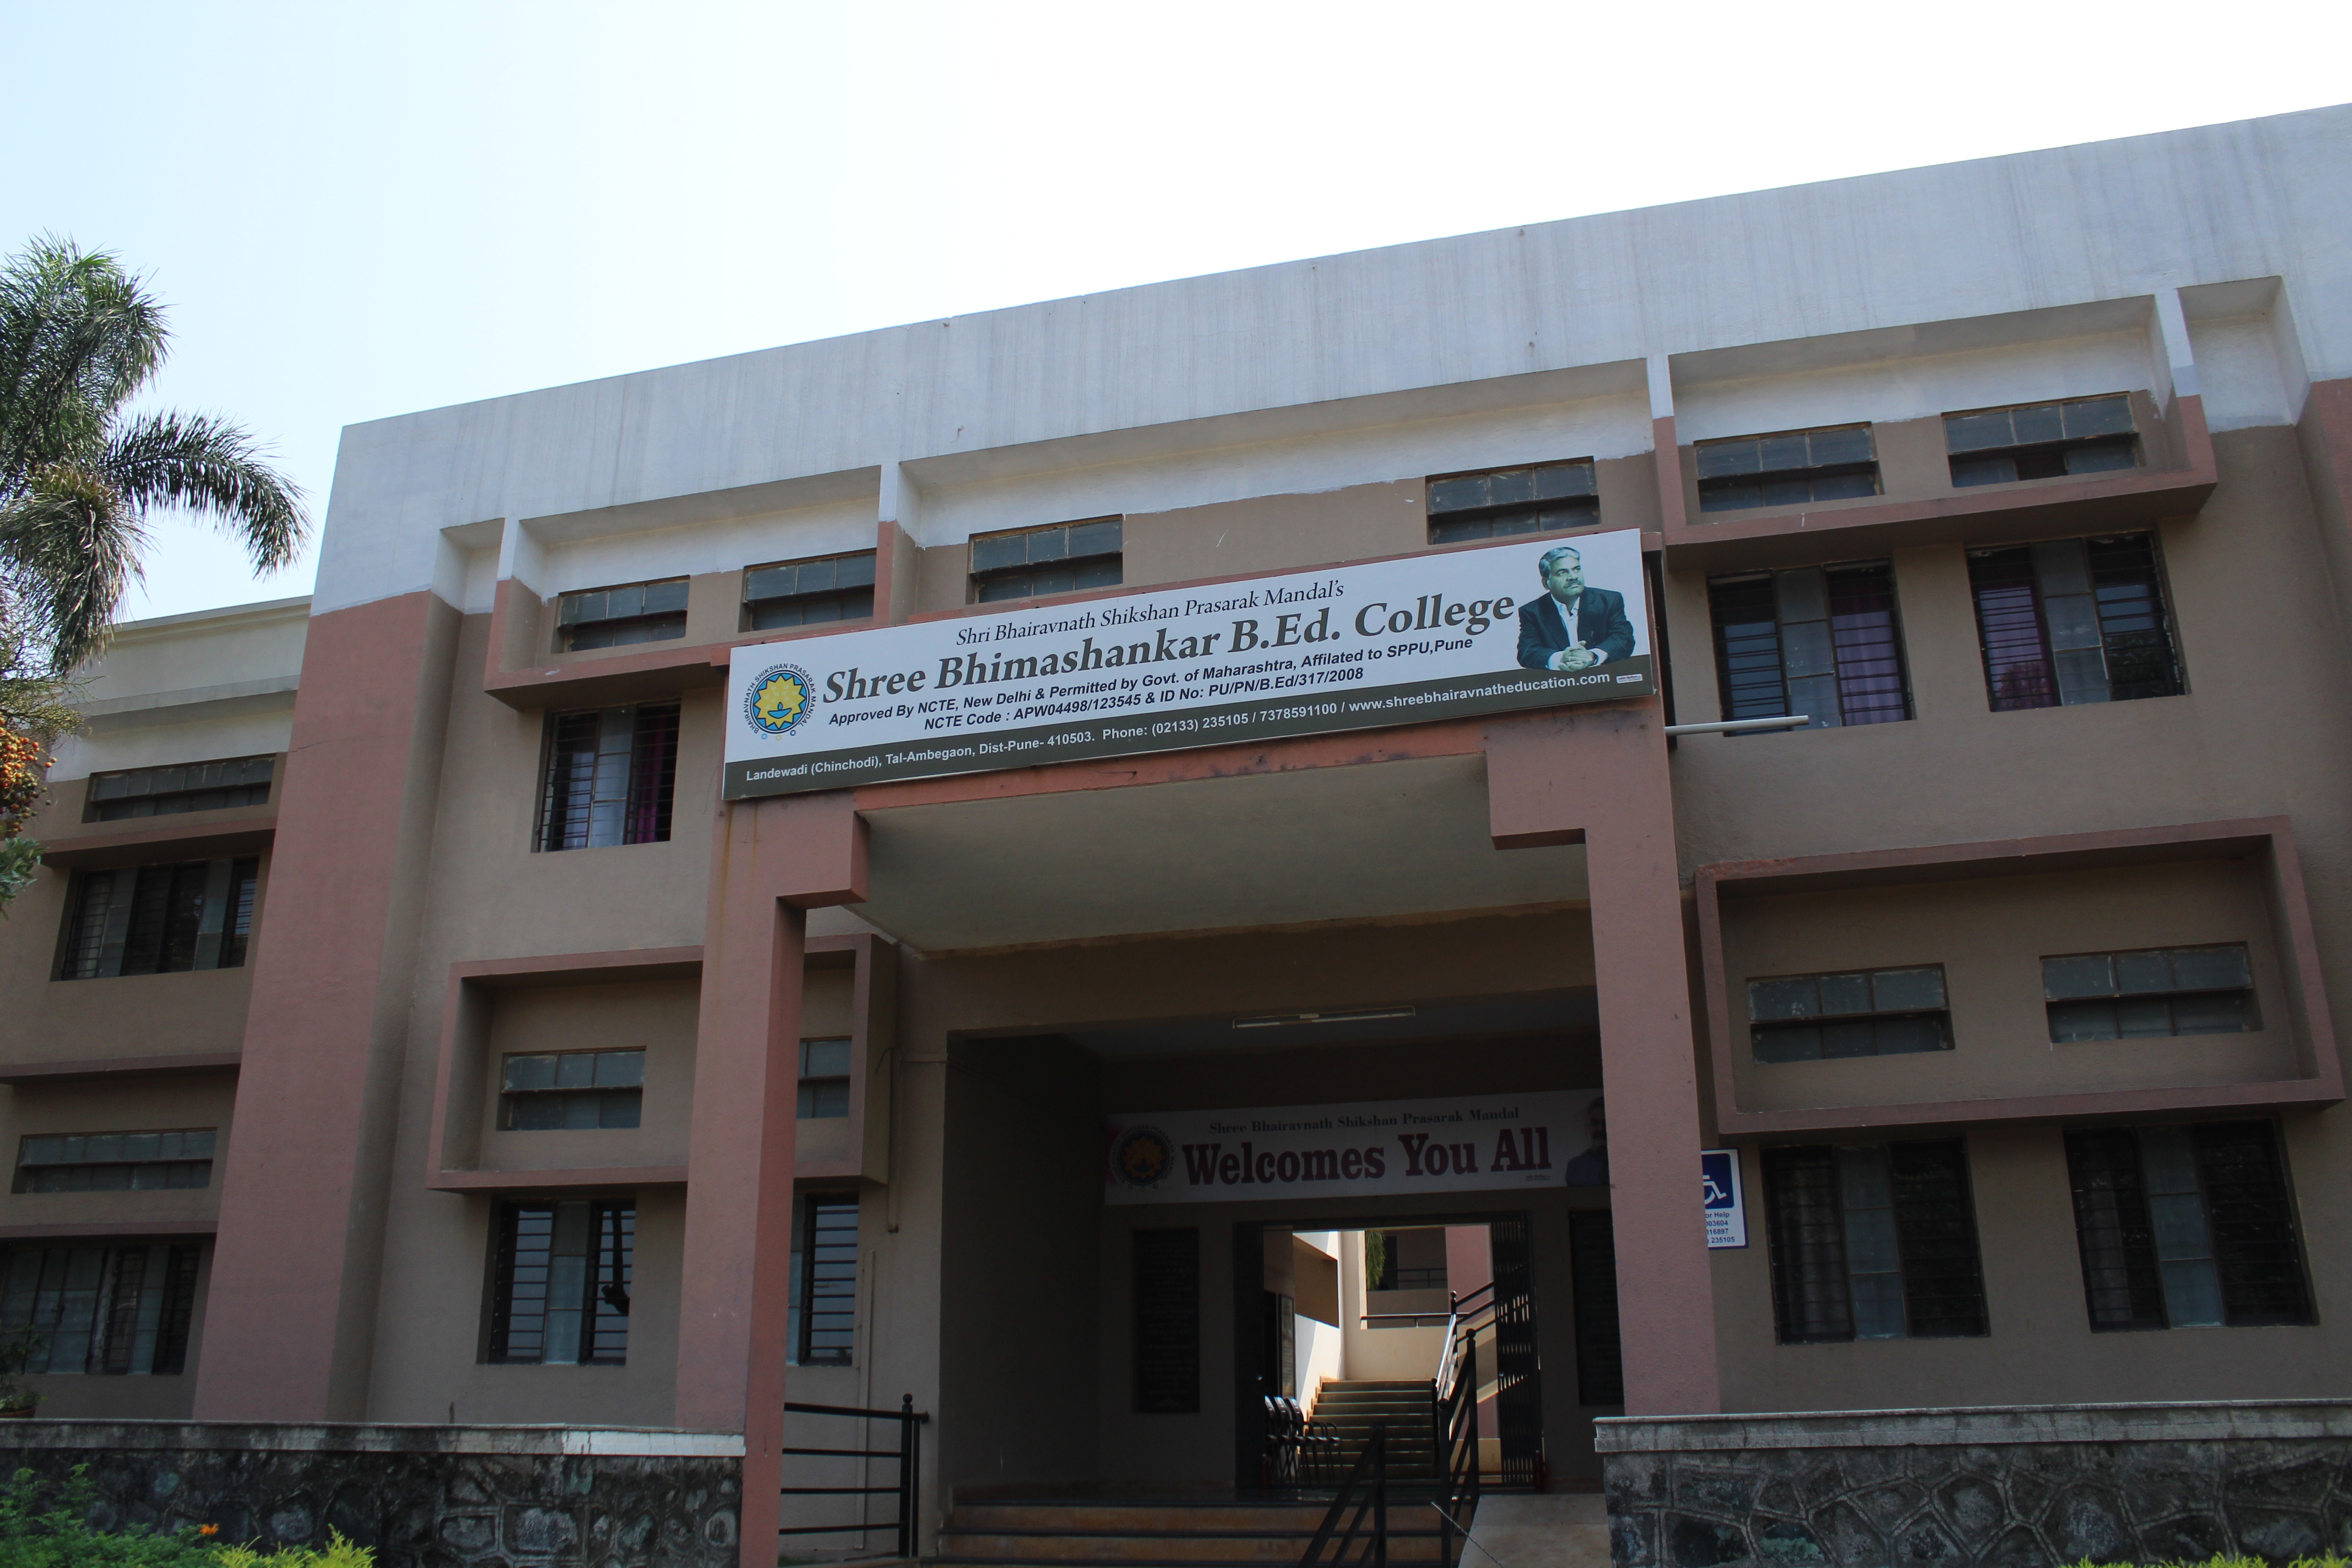 Collge Building